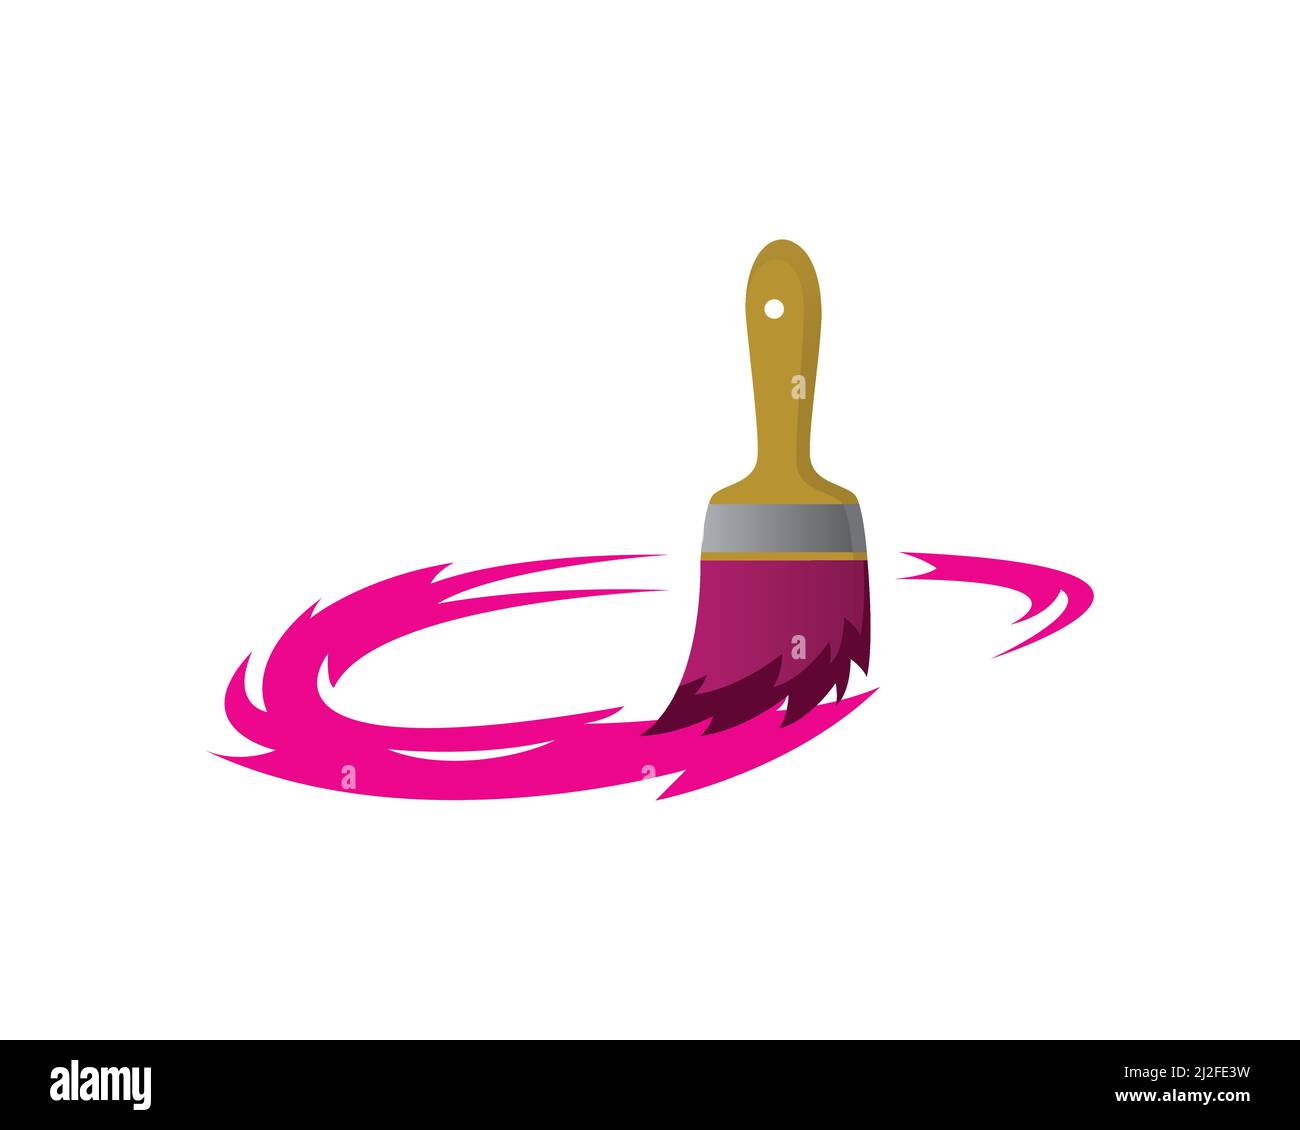 Paint Brush with Swirl Ink Vector Stock Vector